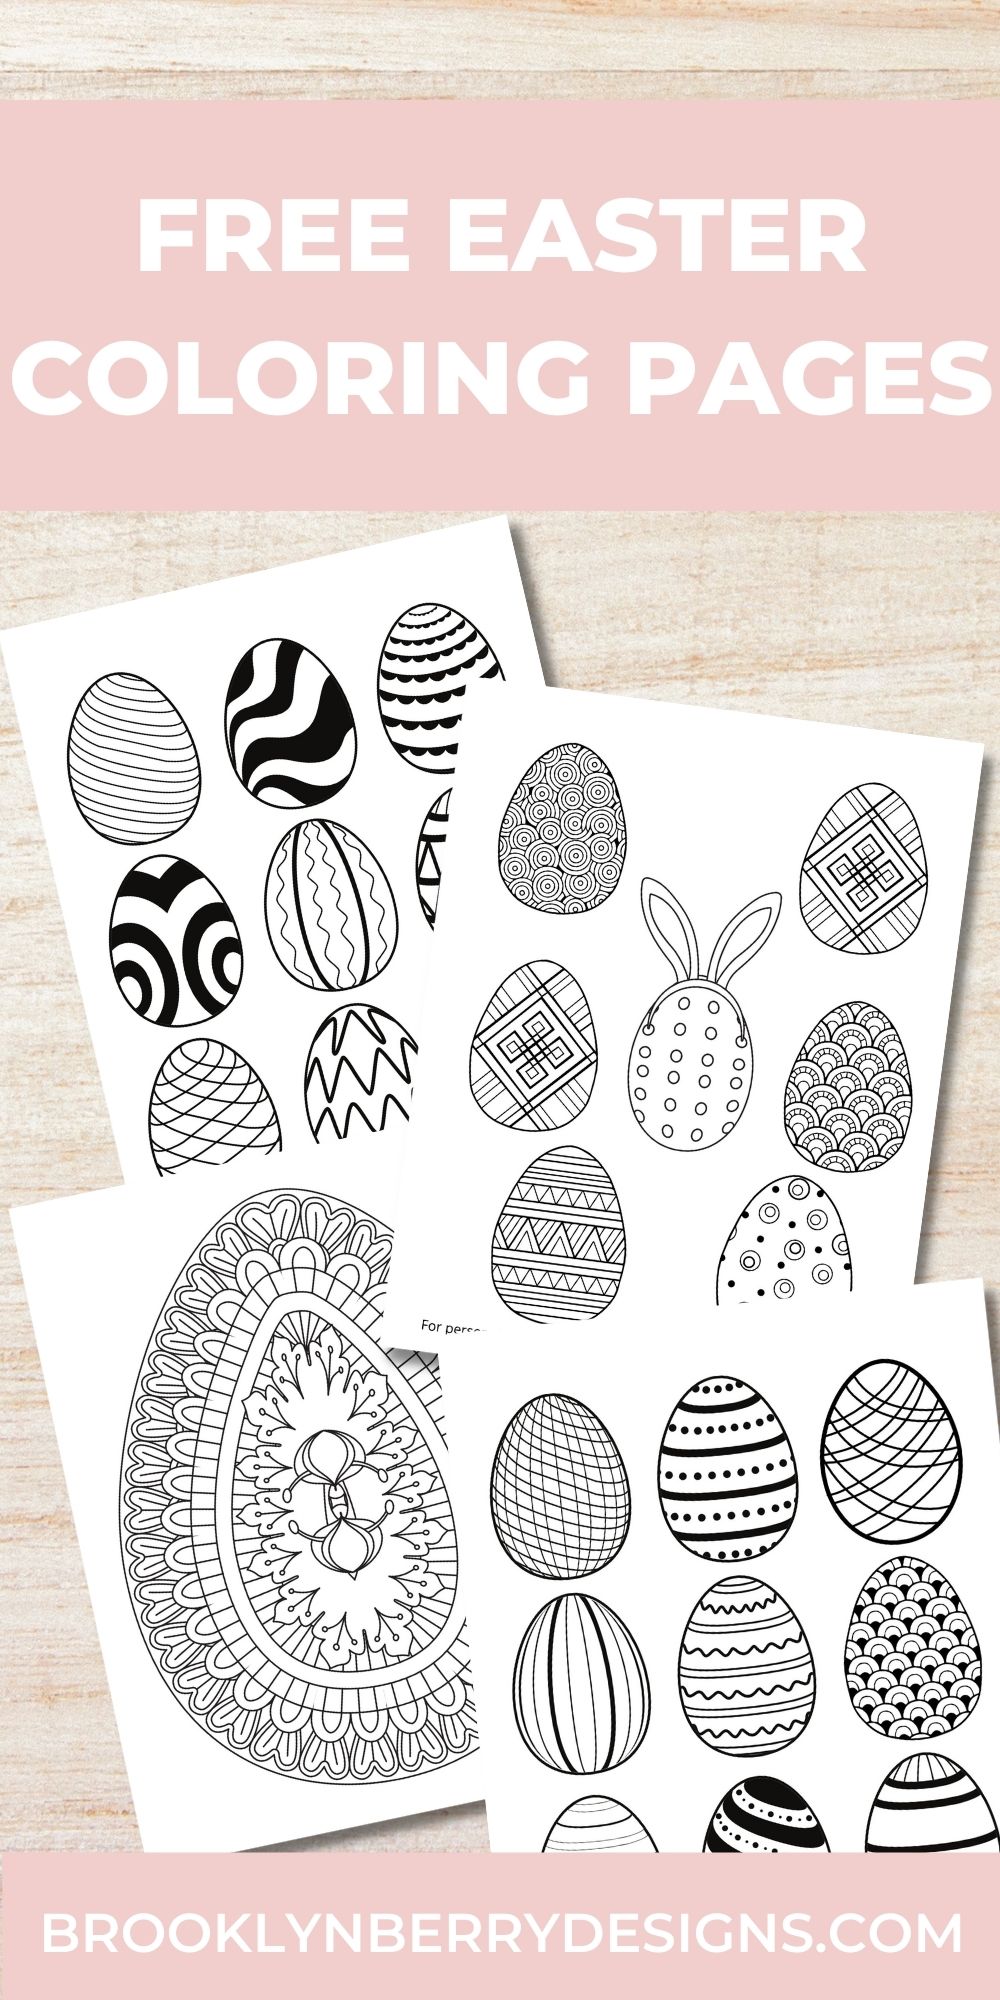 printable patterned egg coloring pages on a wood background. via @brookeberry